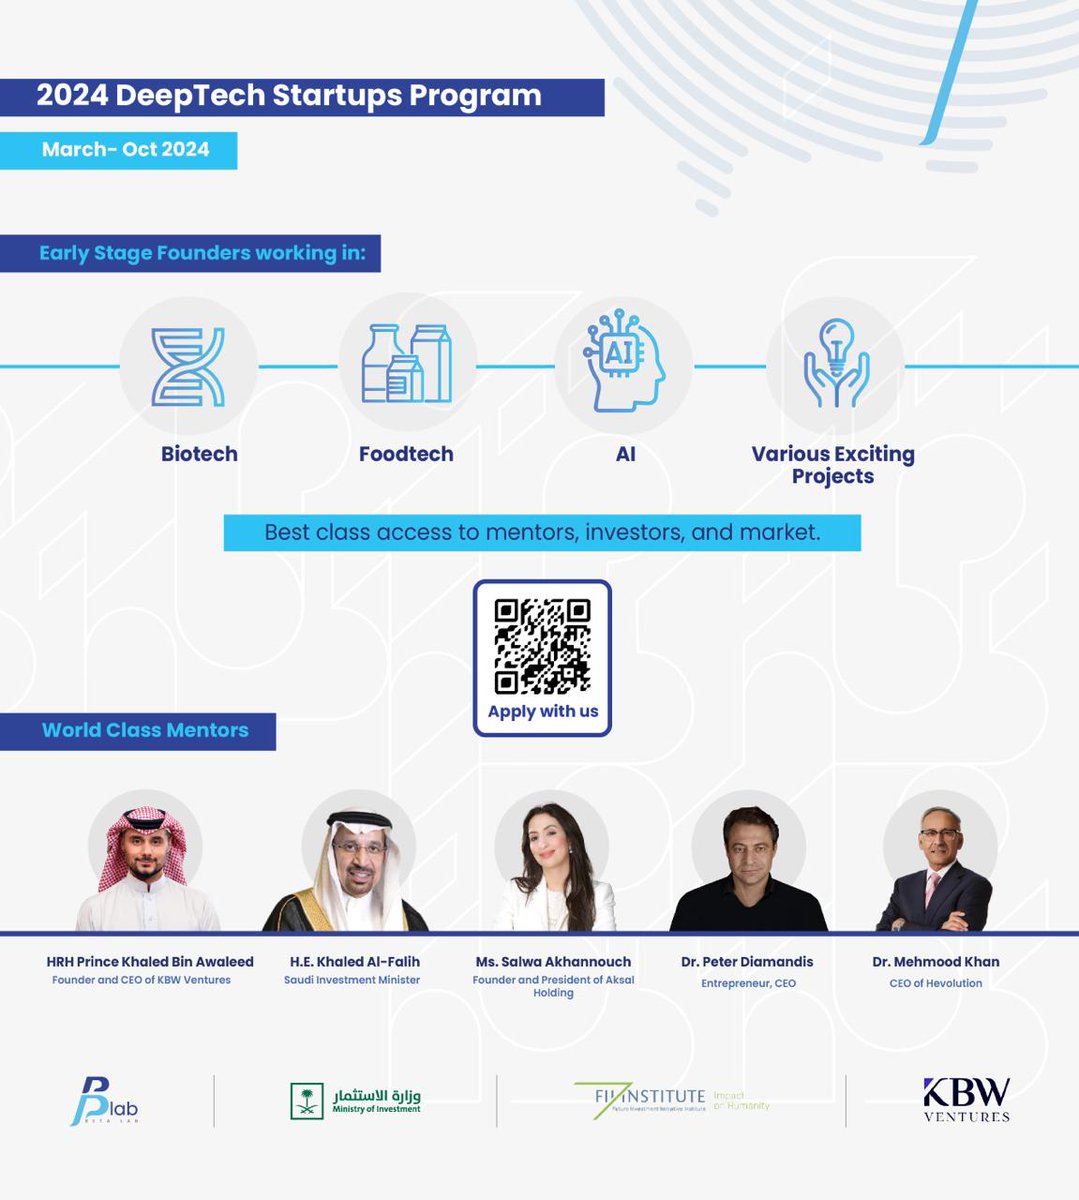 🚀 We are Excited to launch the 2024 DeepTech Startups Program with the @MISA , @FIIKSA , & @KBW_Ventures ! Aiming to fuel innovation in #AI #BioTech, & #FoodTech. Offering investment, mentorship & market access to shape the future of tech. Seeking elite talent & groundbreaking